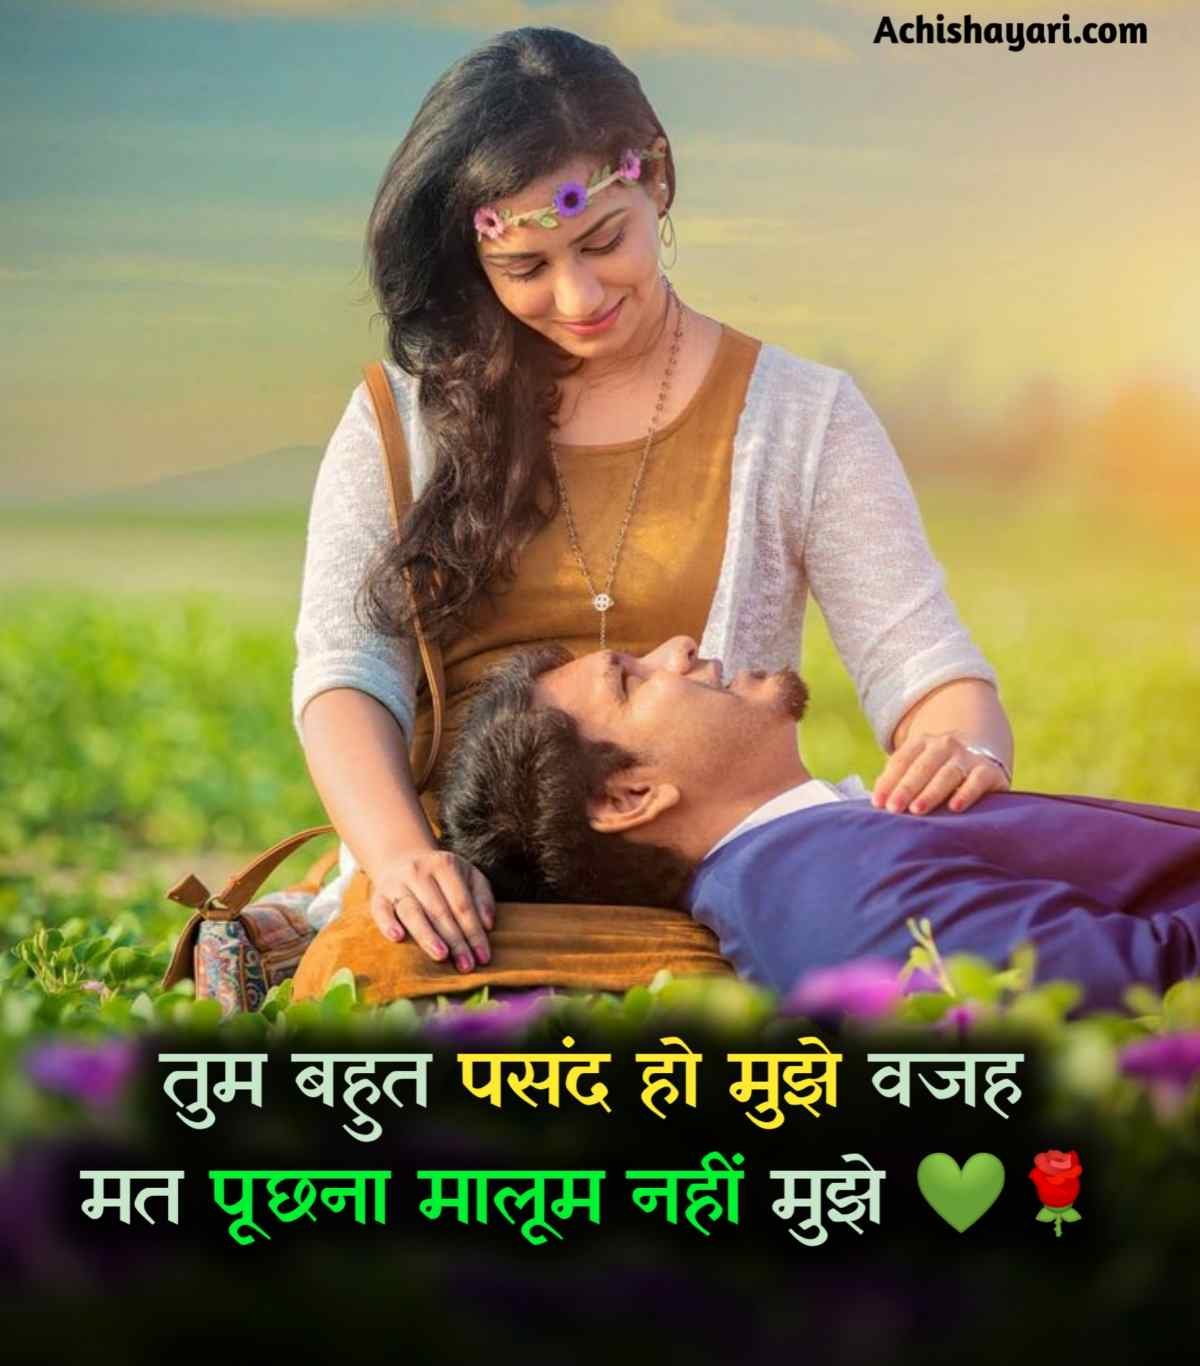 The Ultimate Collection of 999+ Love Images in Hindi – Stunning Full 4K Love Images in Hindi